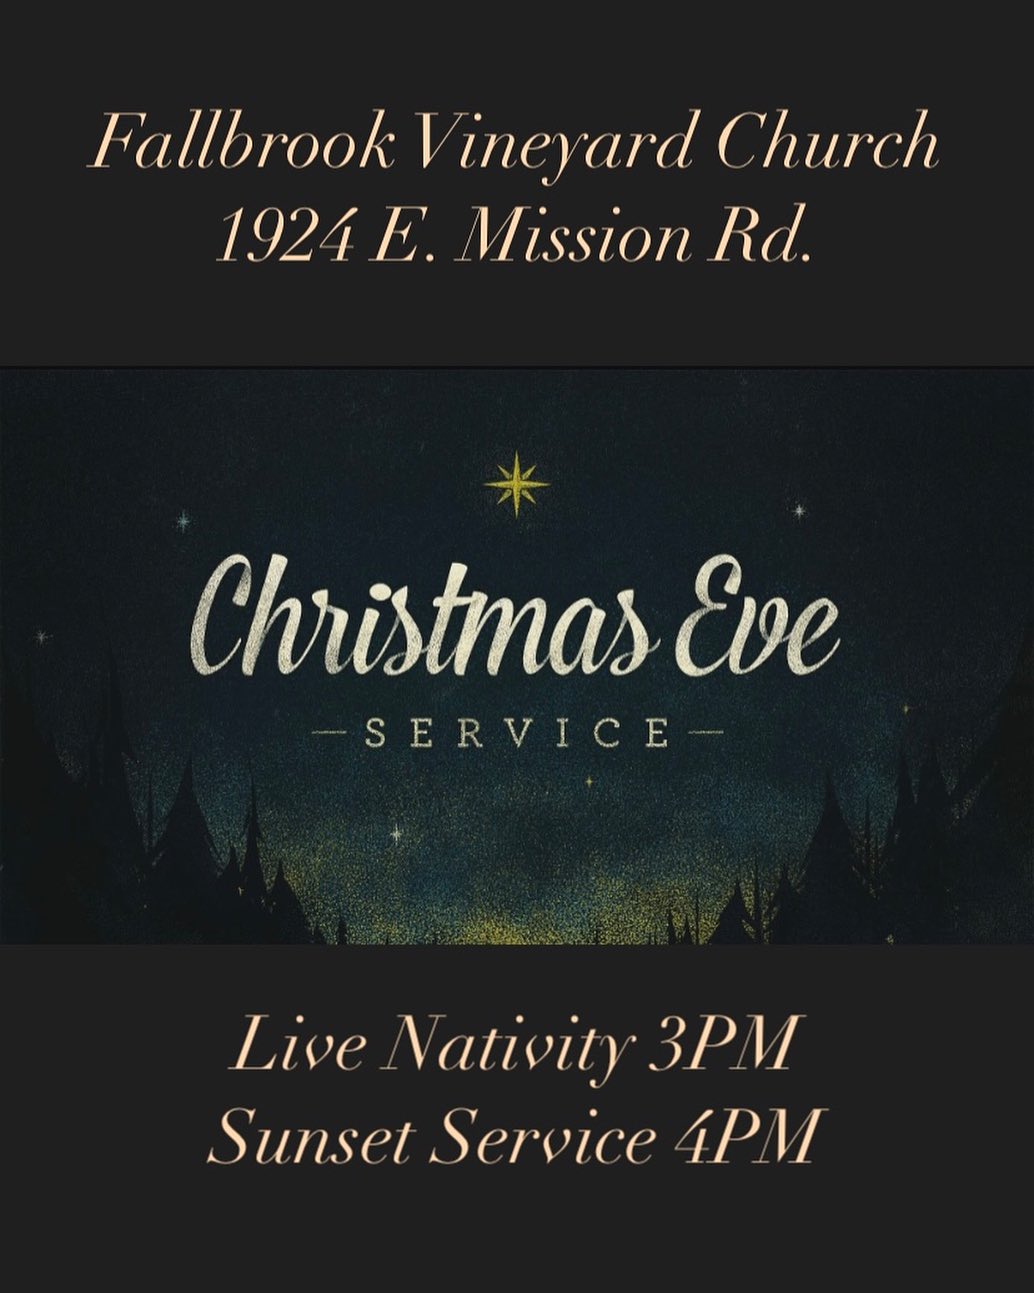 No morning service today. Bring someone THIS AFTERNOON for a memorable Christmas Eve at Fallbrook Vineyard Church! Live nativity at 3PM and sunset service at 4PM